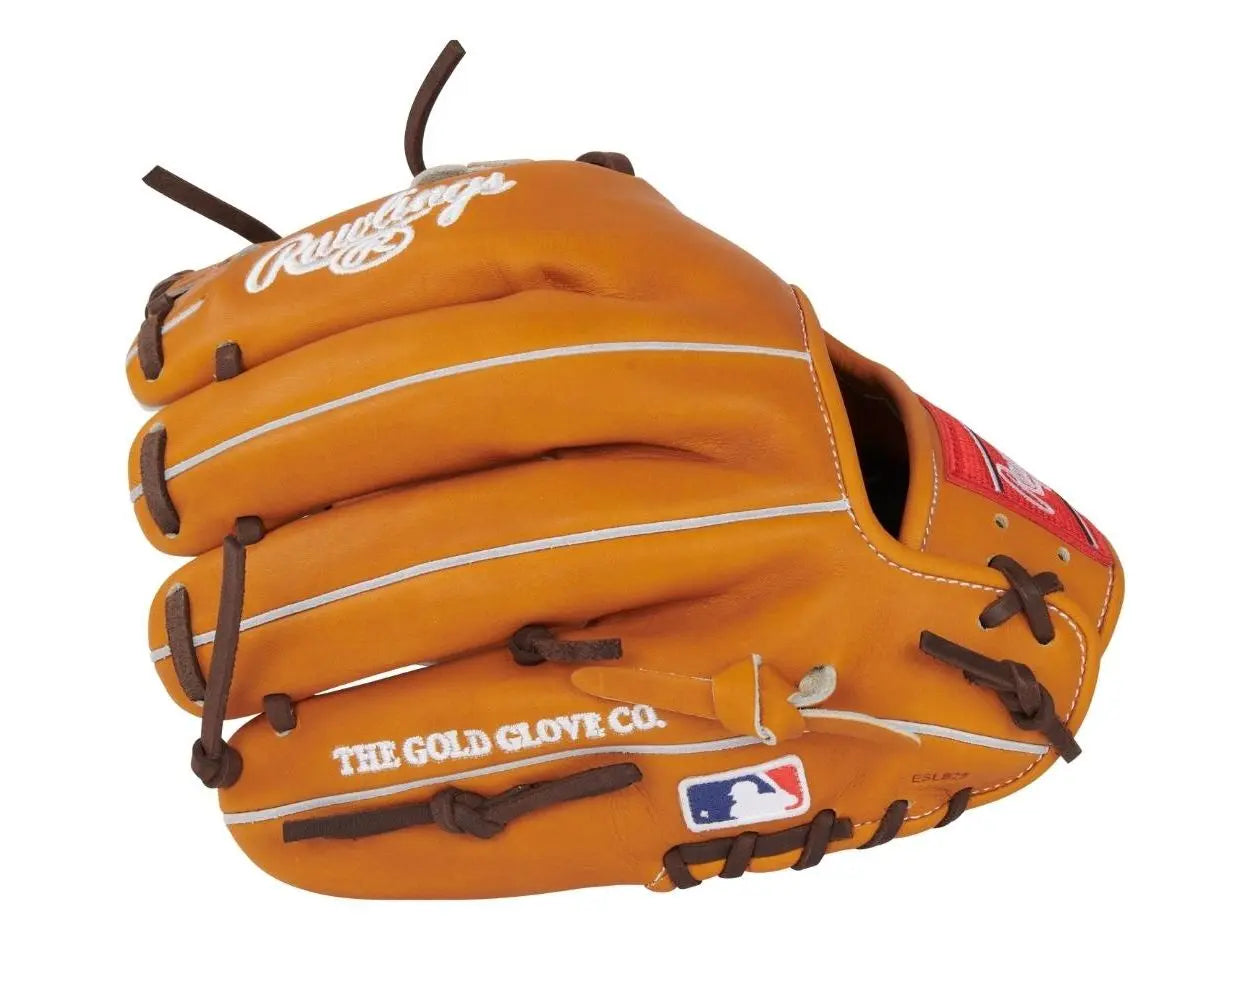 RAWLINGS HEART OF THE HIDE 11.5-INCH INFIELD GLOVE: PRO204-2T